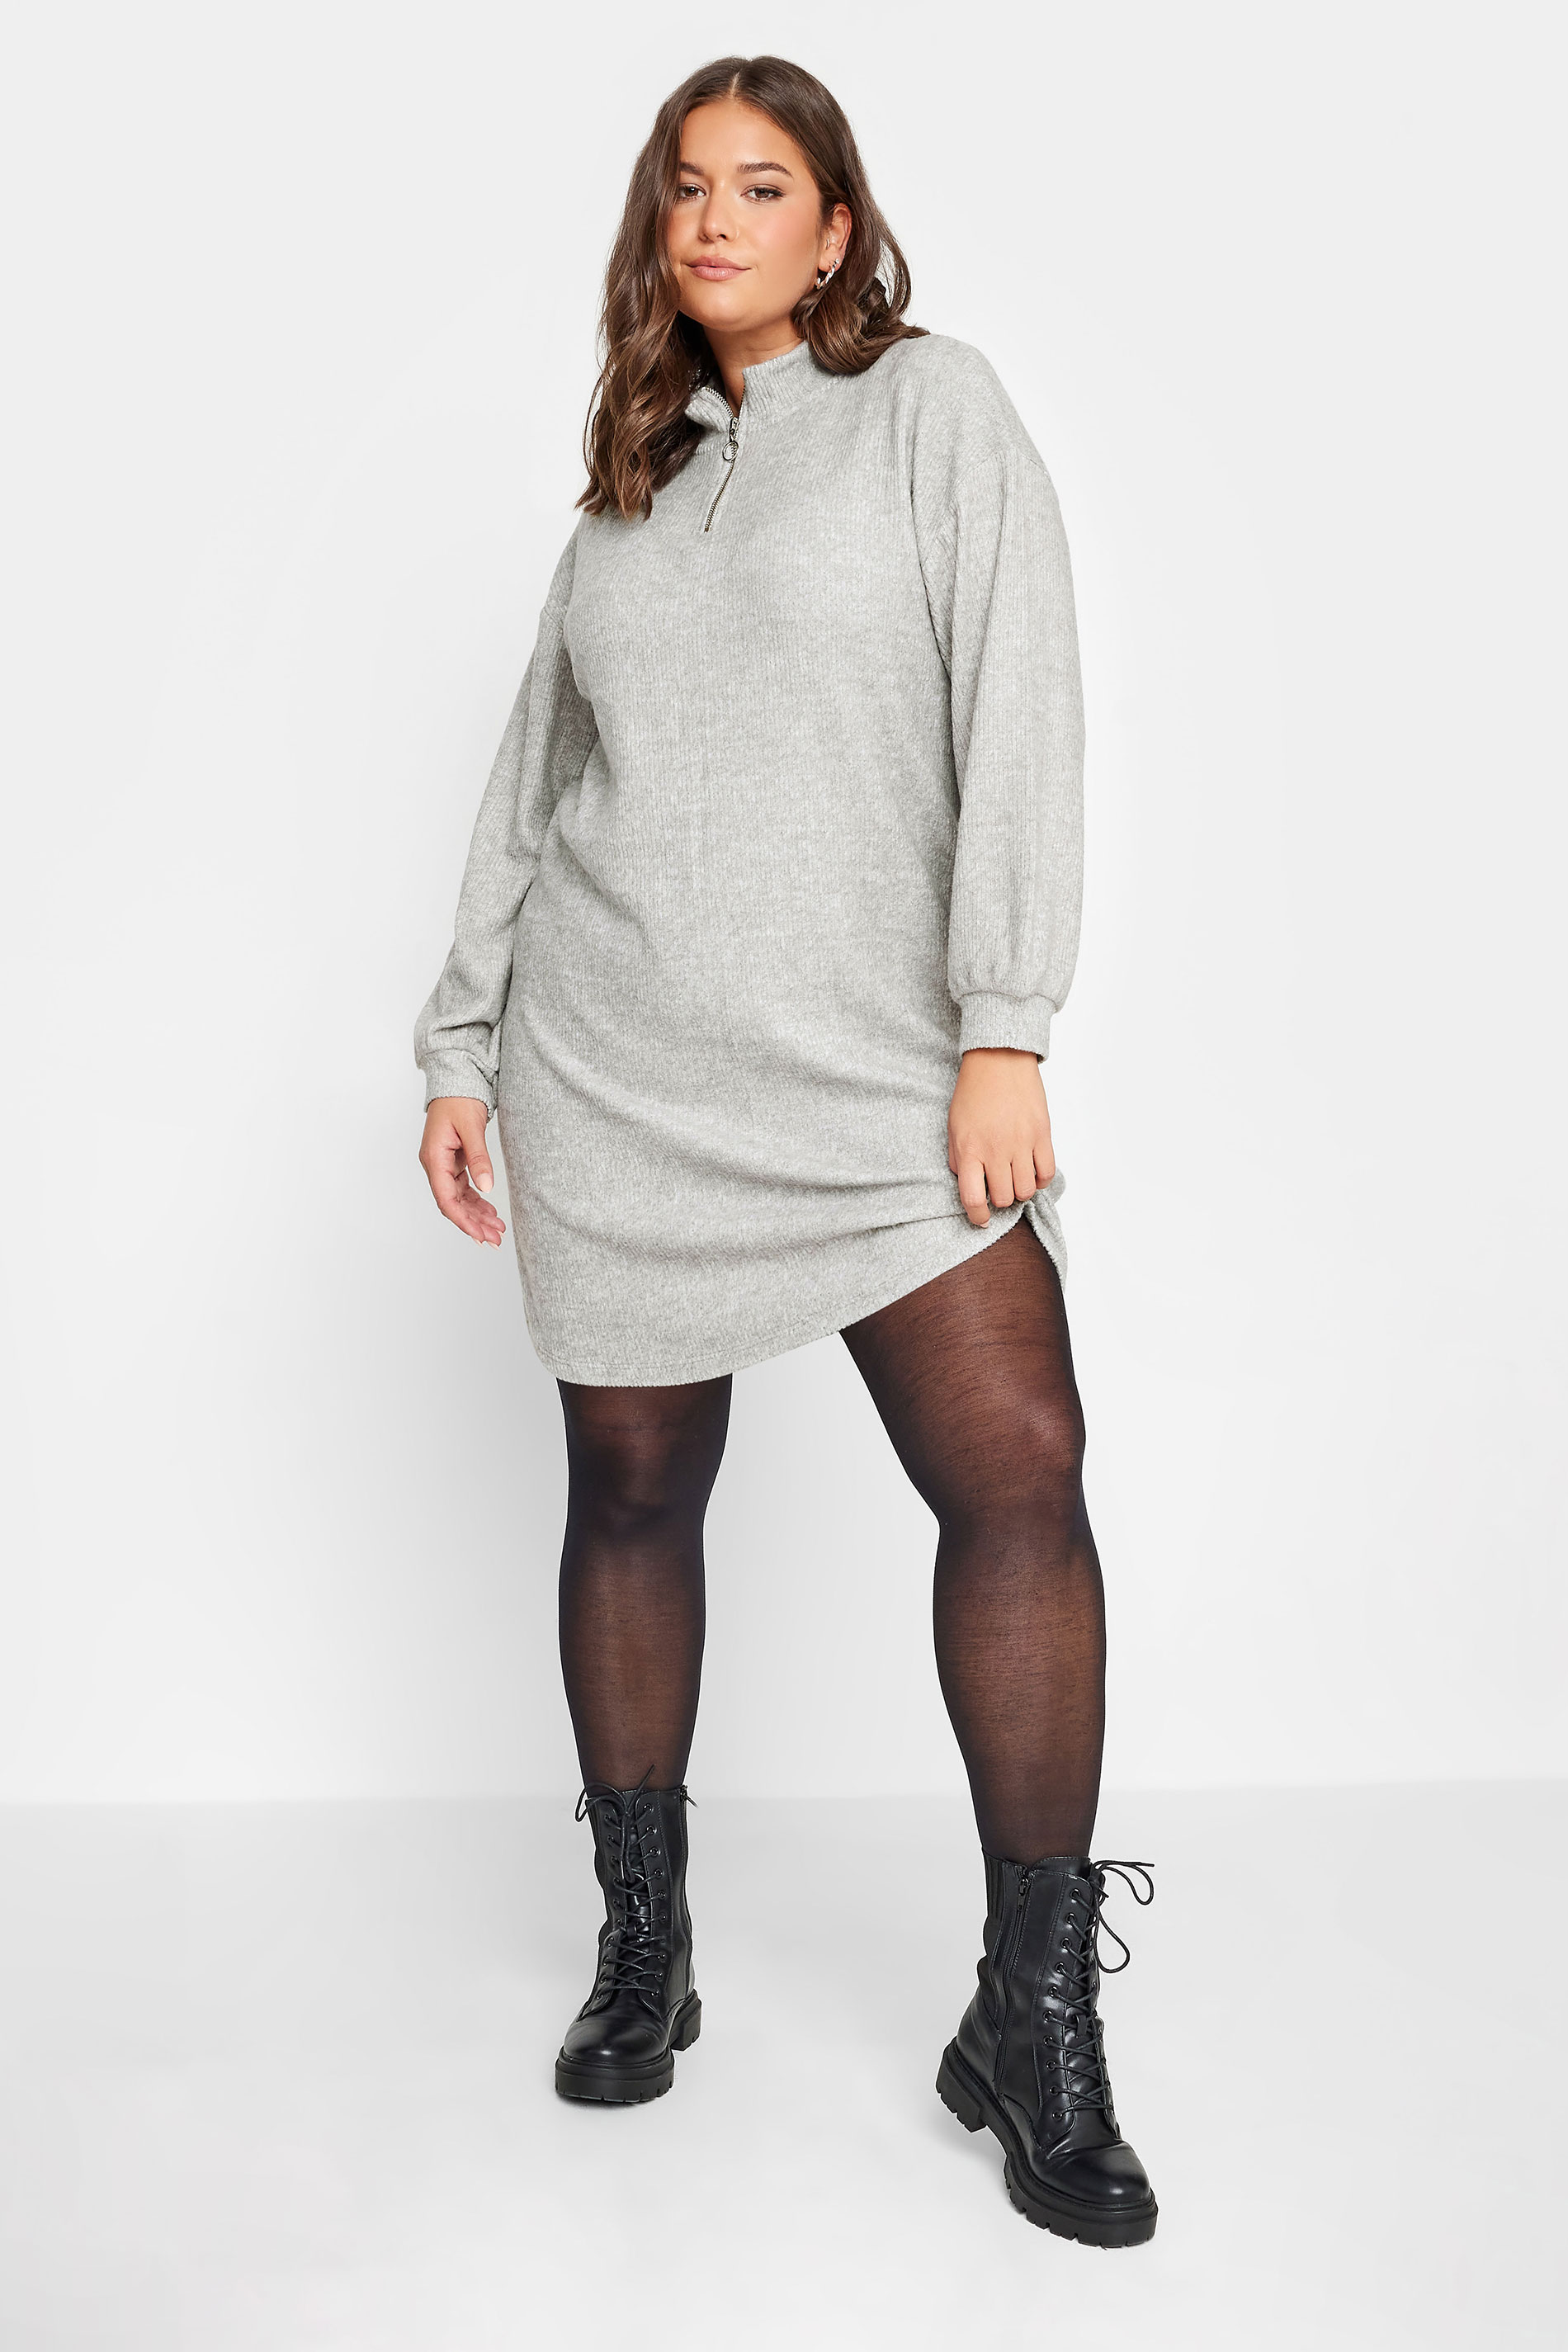 Product Video For YOURS Plus Size Grey Soft Touch Zip Neck Jumper Dress | Yours Clothing 1